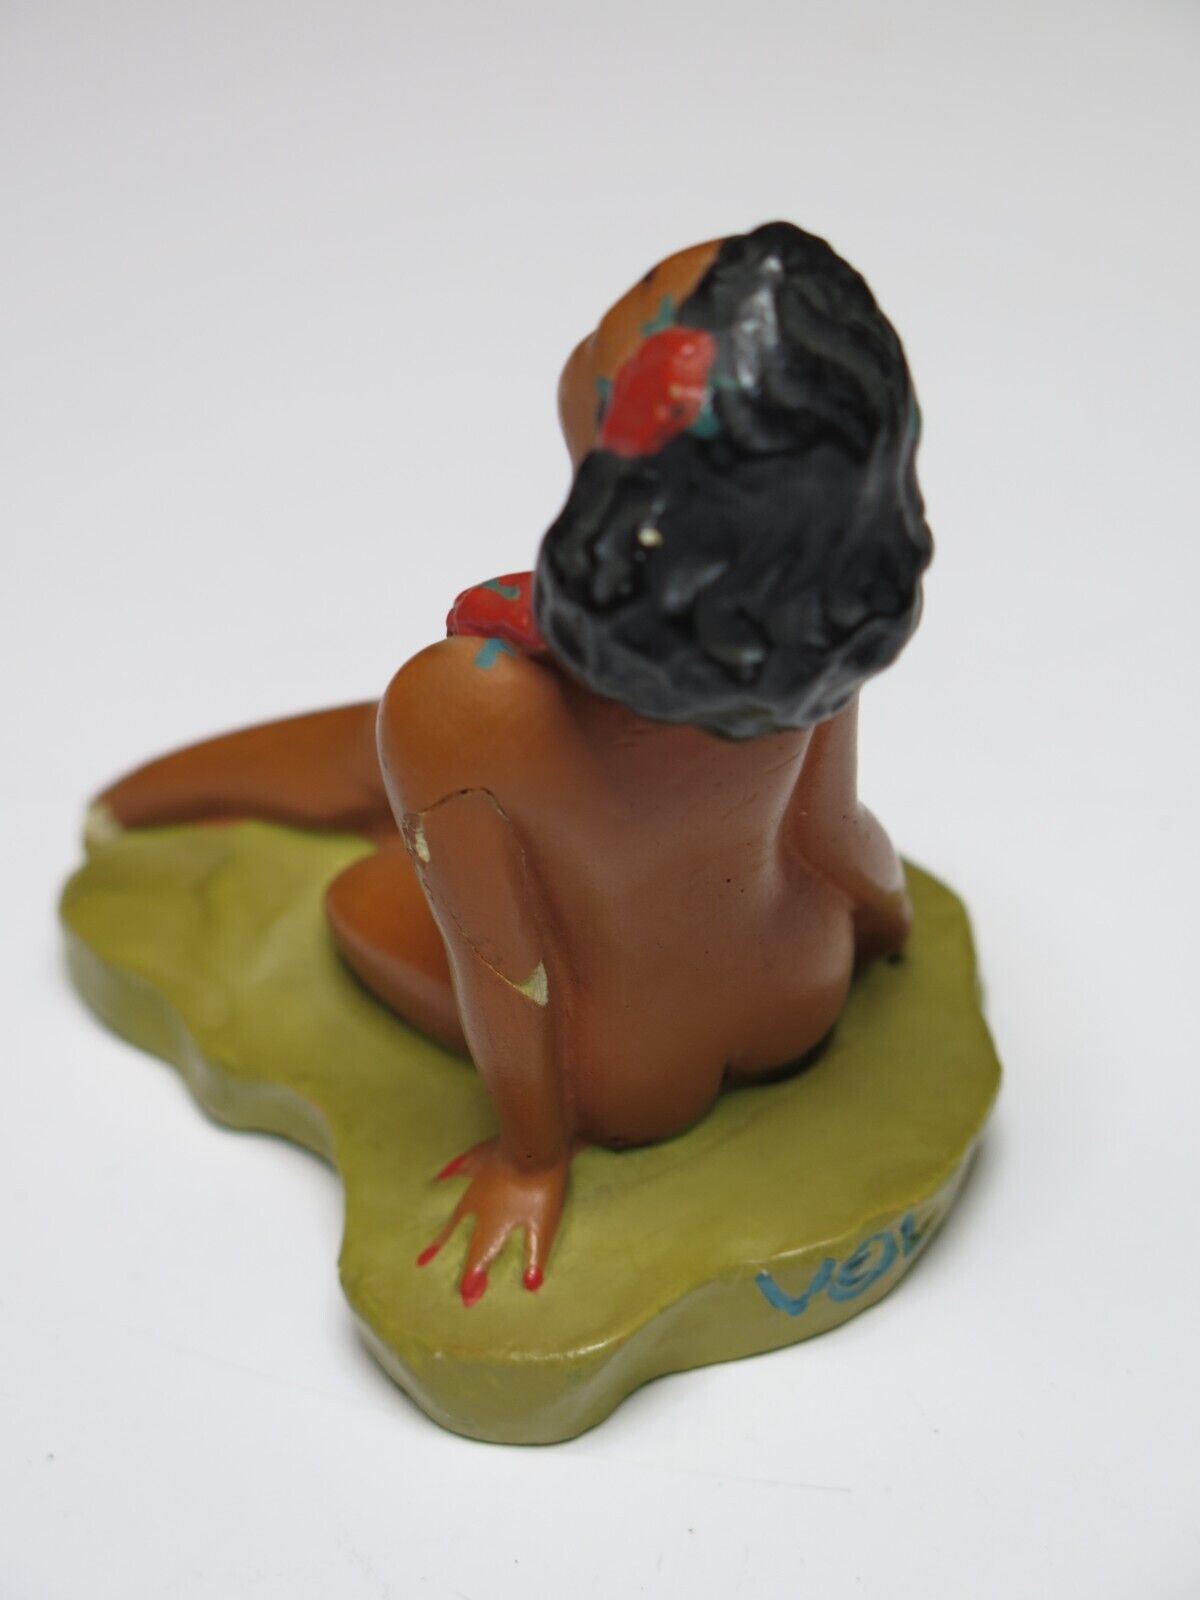 VTG 1940'S WWII PINUP CHALKWARE SOUTH SEA SIRENS by VERDAN LOLAYNE - Nude Scamp